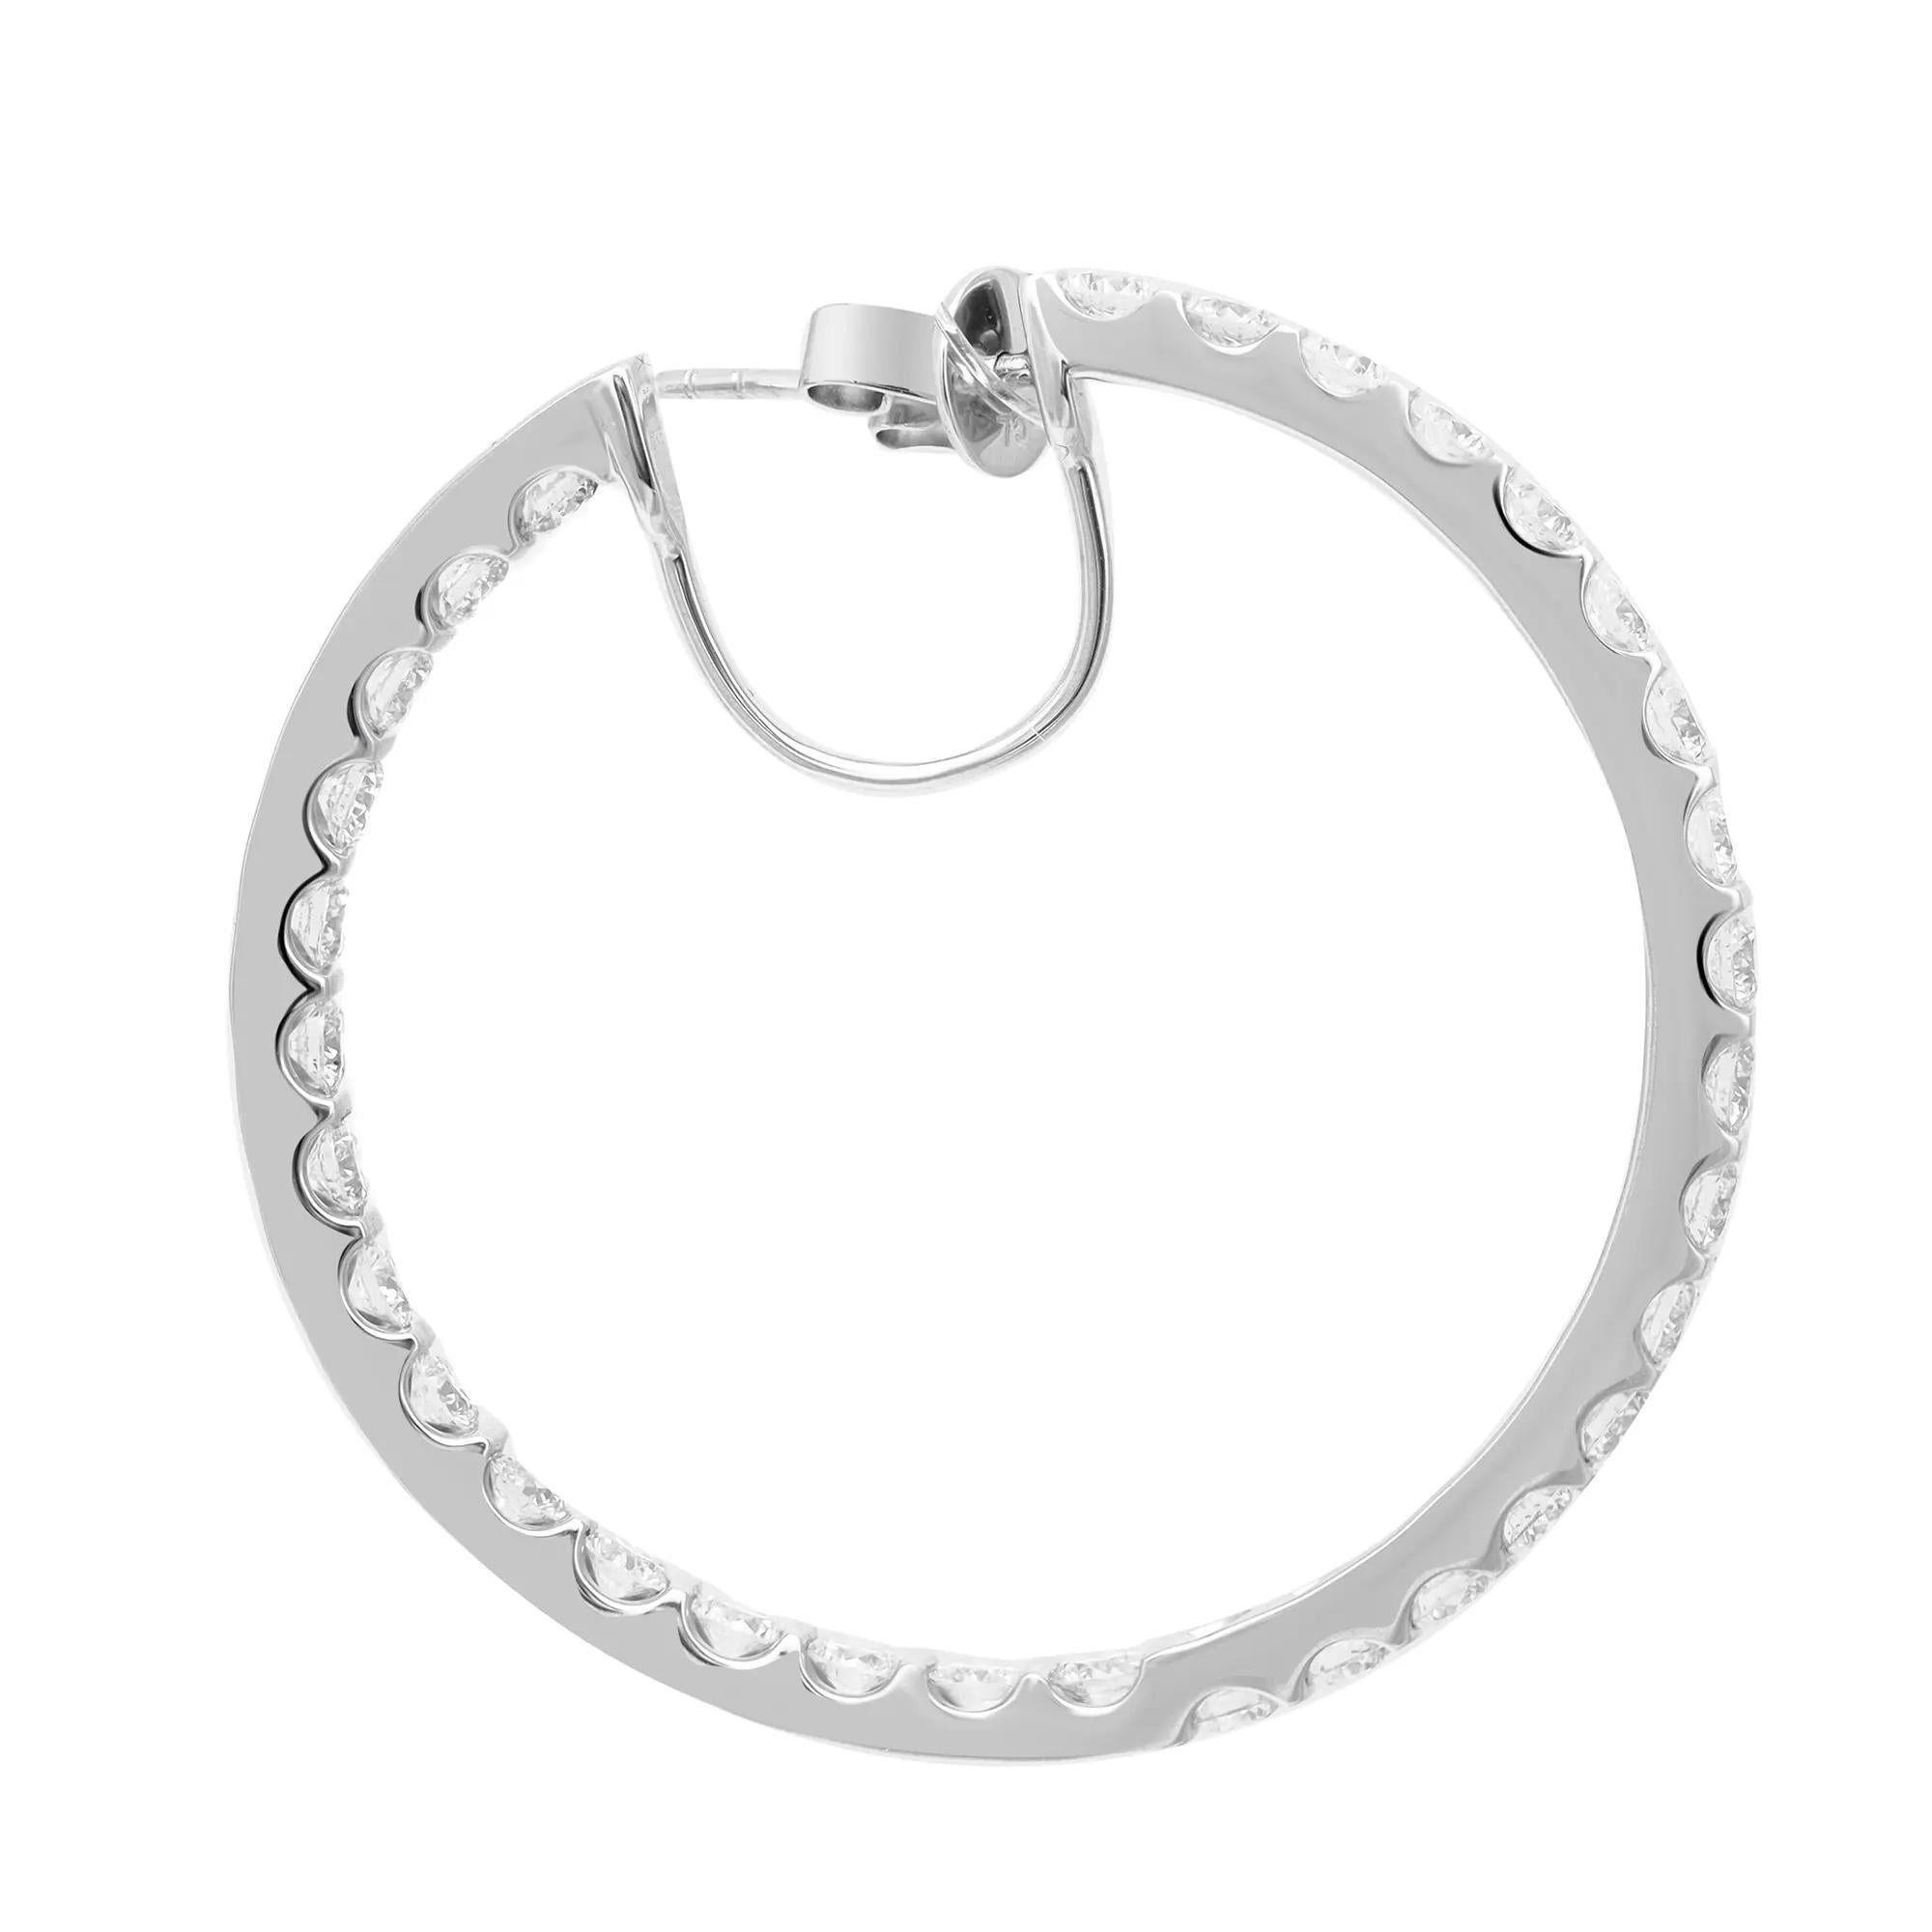 Modern Inside Out Round Cut Diamond Hoop Earrings 18K White Gold 4.76Cttw 1.5 Inches For Sale